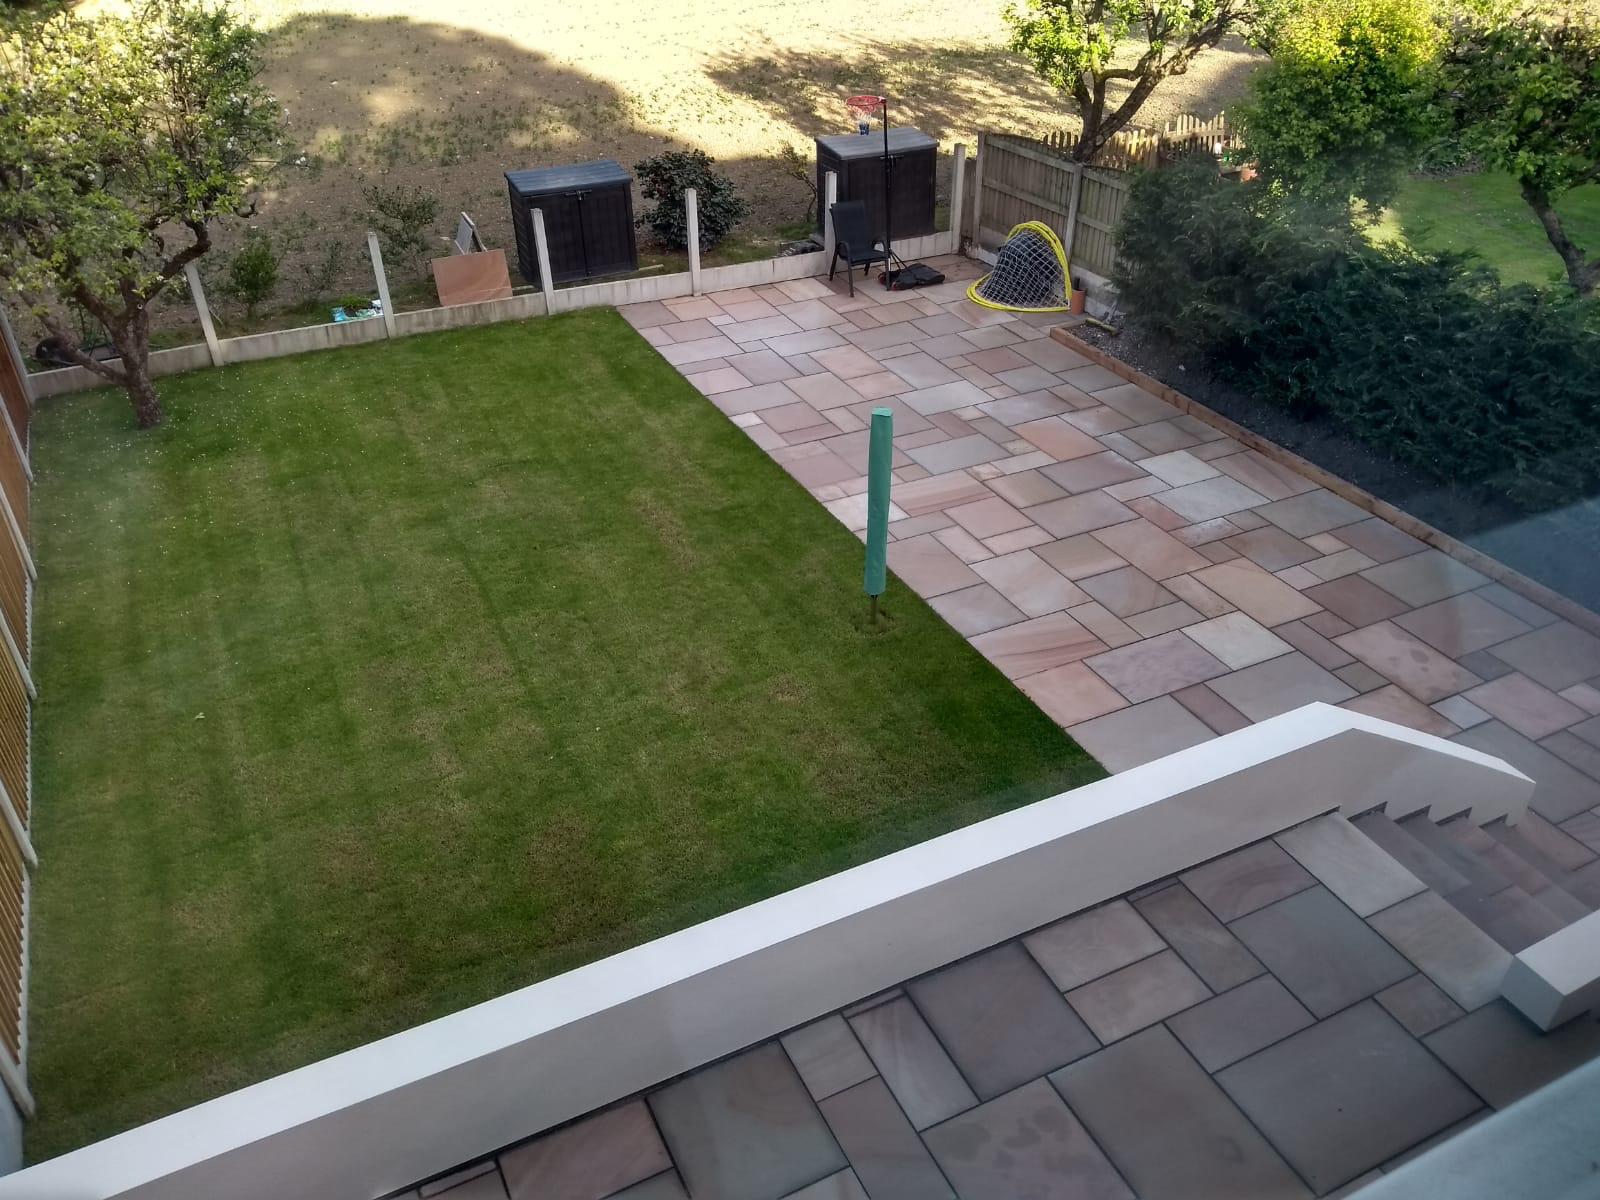 Oakmere Landscaping Complete a New Garden for Client in Salford